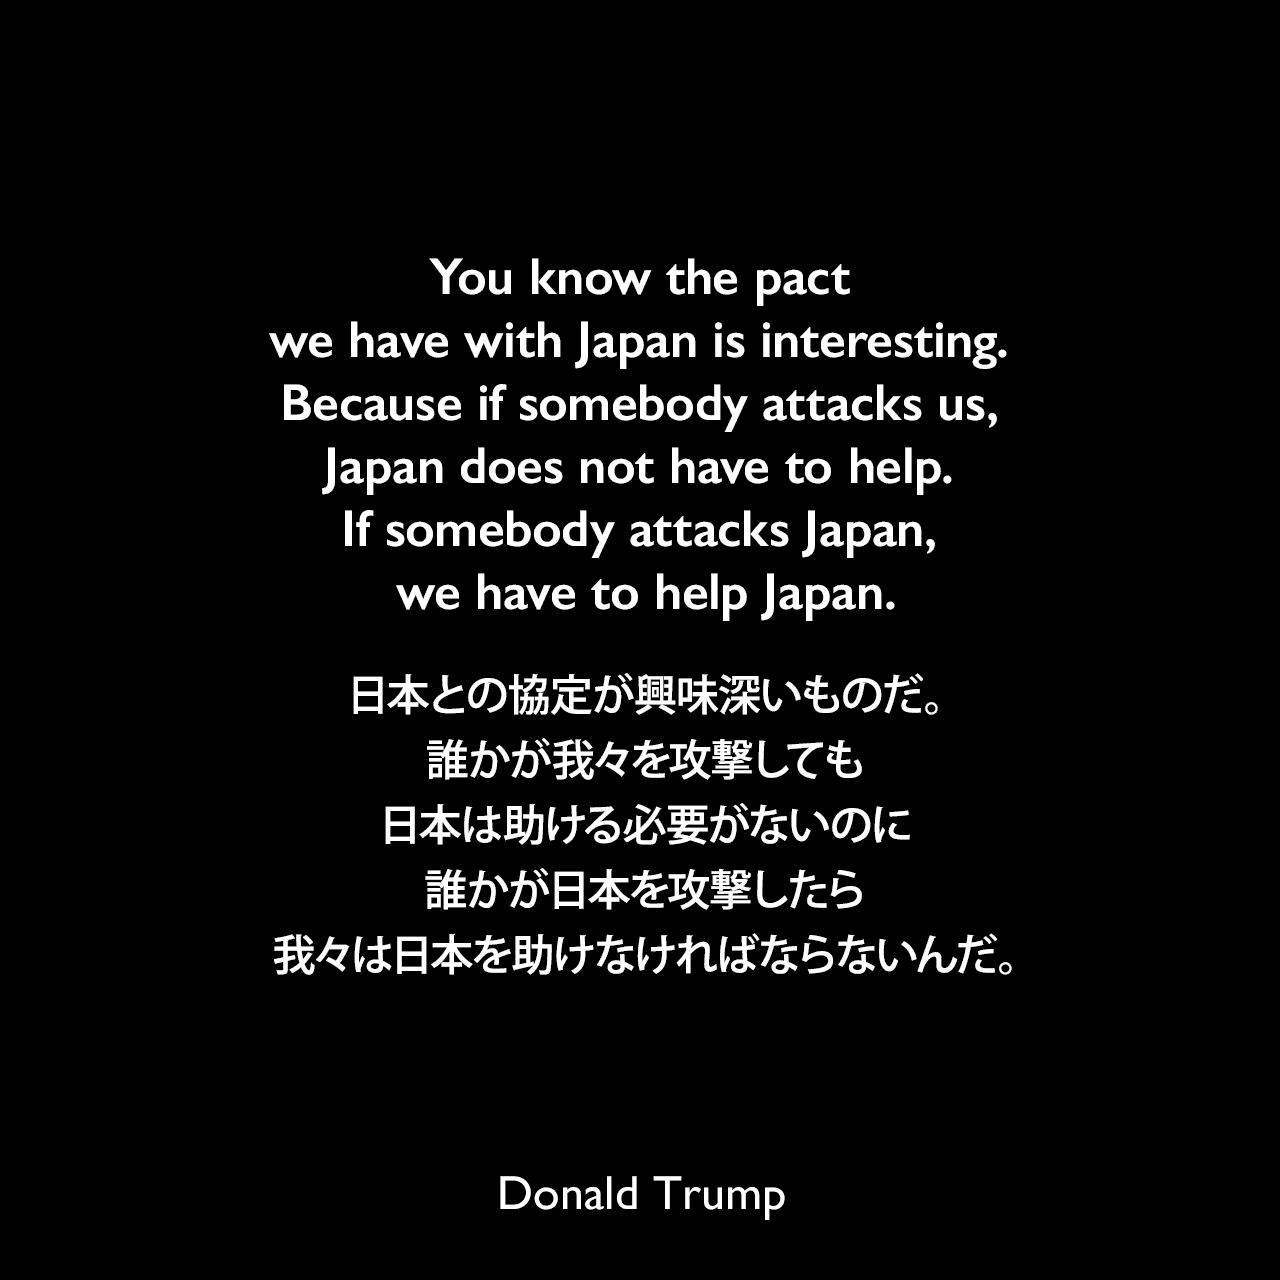 You know the pact we have with Japan is interesting. Because if somebody attacks us, Japan does not have to help. If somebody attacks Japan, we have to help Japan.日本との協定が興味深いものだ。誰かが我々を攻撃しても日本は助ける必要がないのに、誰かが日本を攻撃したら我々は日本を助けなければならないんだ。Donald Trump